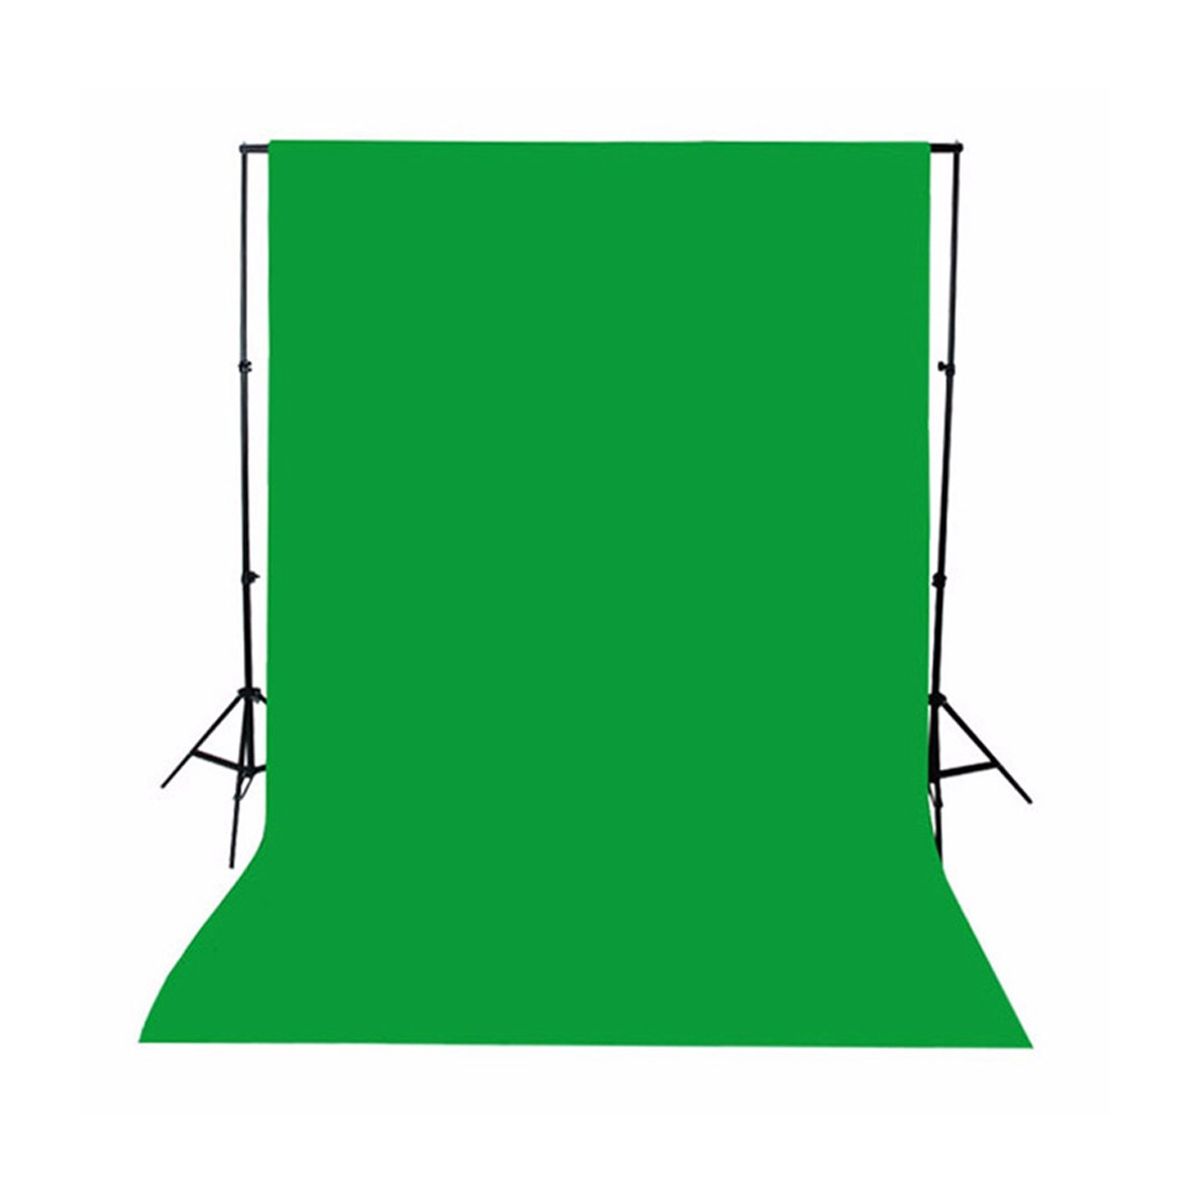 15x2M-Portrait-Photography-Background-Non-woven-Fabric-Cloth-Professional-Images-Matting--Backdrop-f-1730454